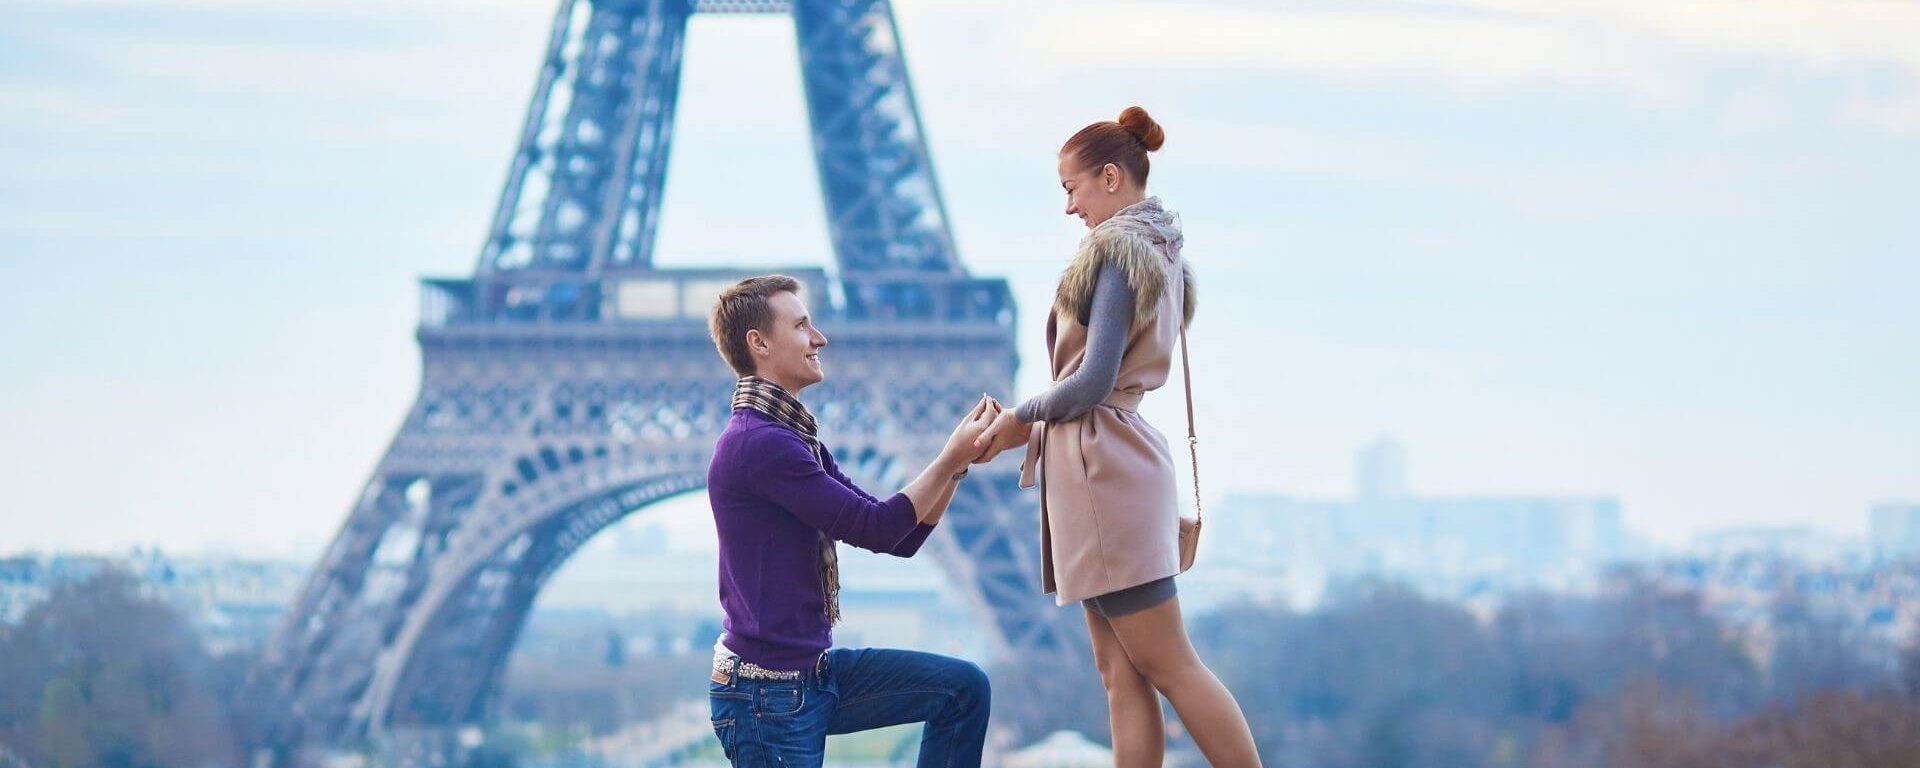 Comments For Engagement Photos Loved By Couples